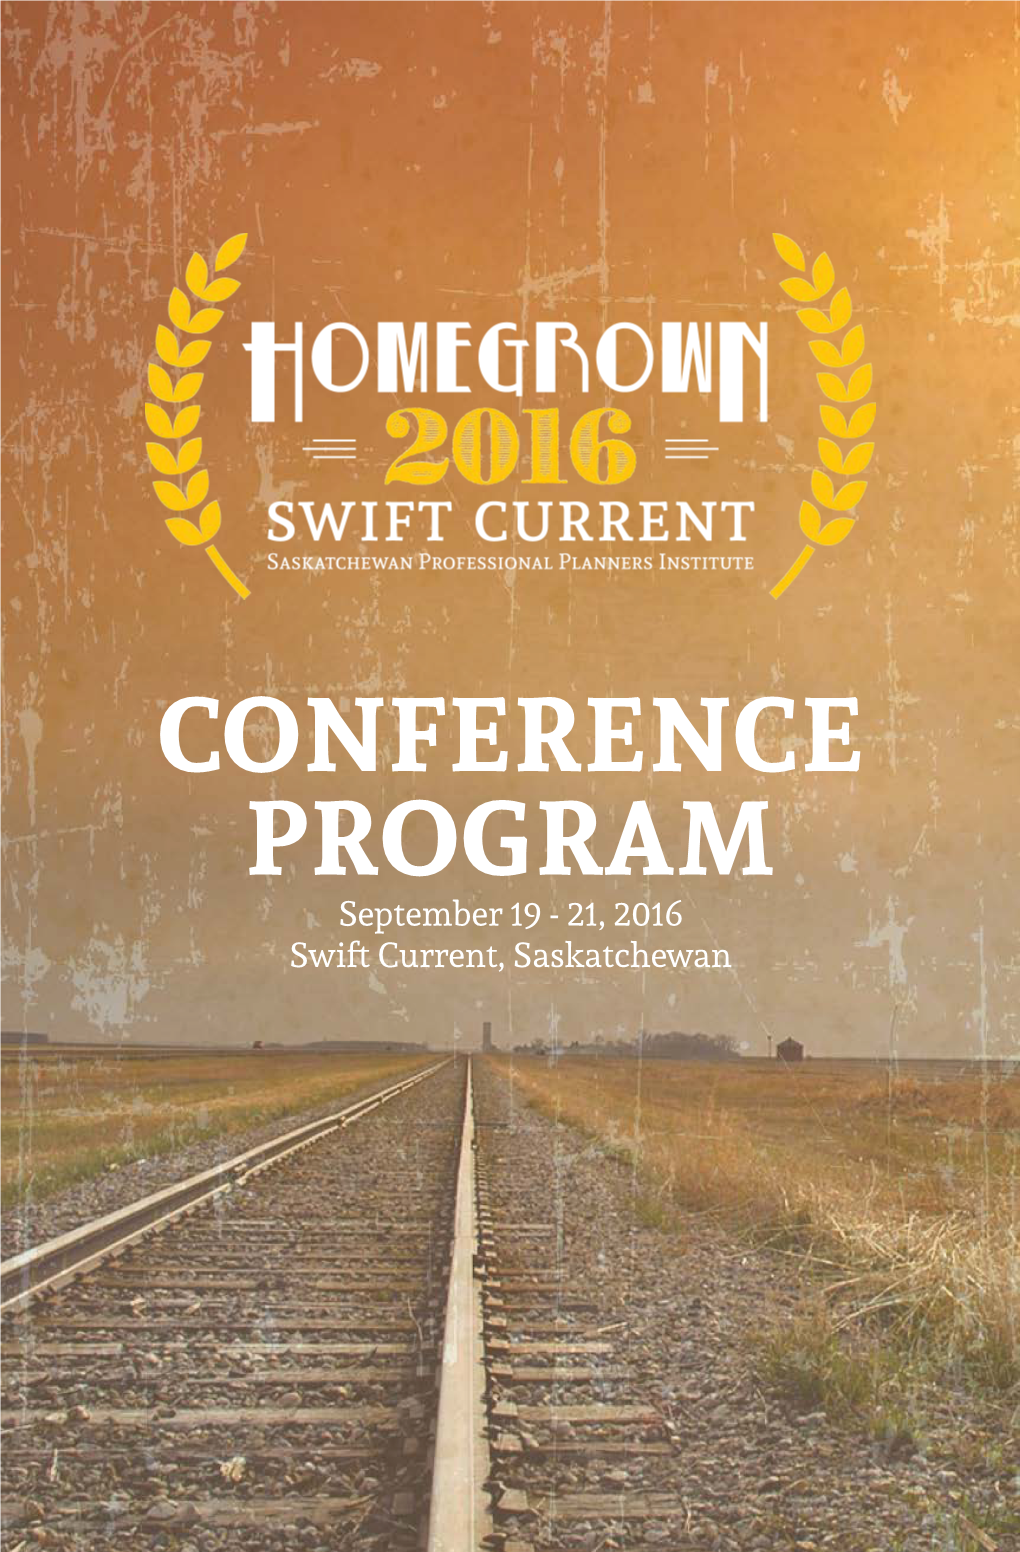 CONFERENCE PROGRAM September 19 - 21, 2016 Swift Current, Saskatchewan Special Thanks to the 2016 CONFERENCE COMMITTEE